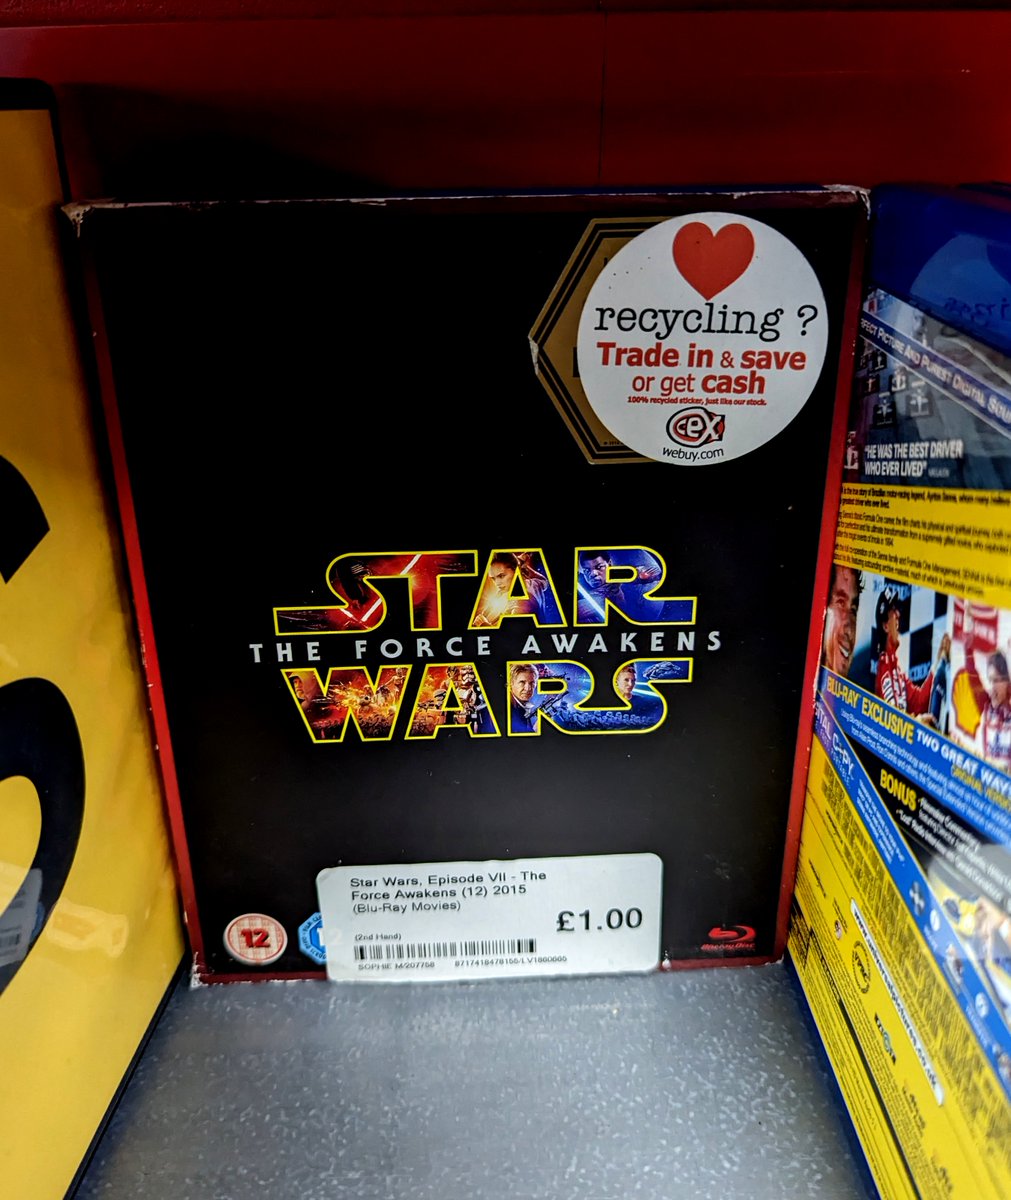 Who else would have thought that every single sequel trilogy movie would eventually make it into the bargain bucket haha #CEX #StarWarsEpisodeVIITheForceAwakens #BluRay #StarWars #LucasFilm #Disney #DisneyPlus #StarWarsTheForceAwakens #Films #Movies #TvSeries #Sub #Like #Follow